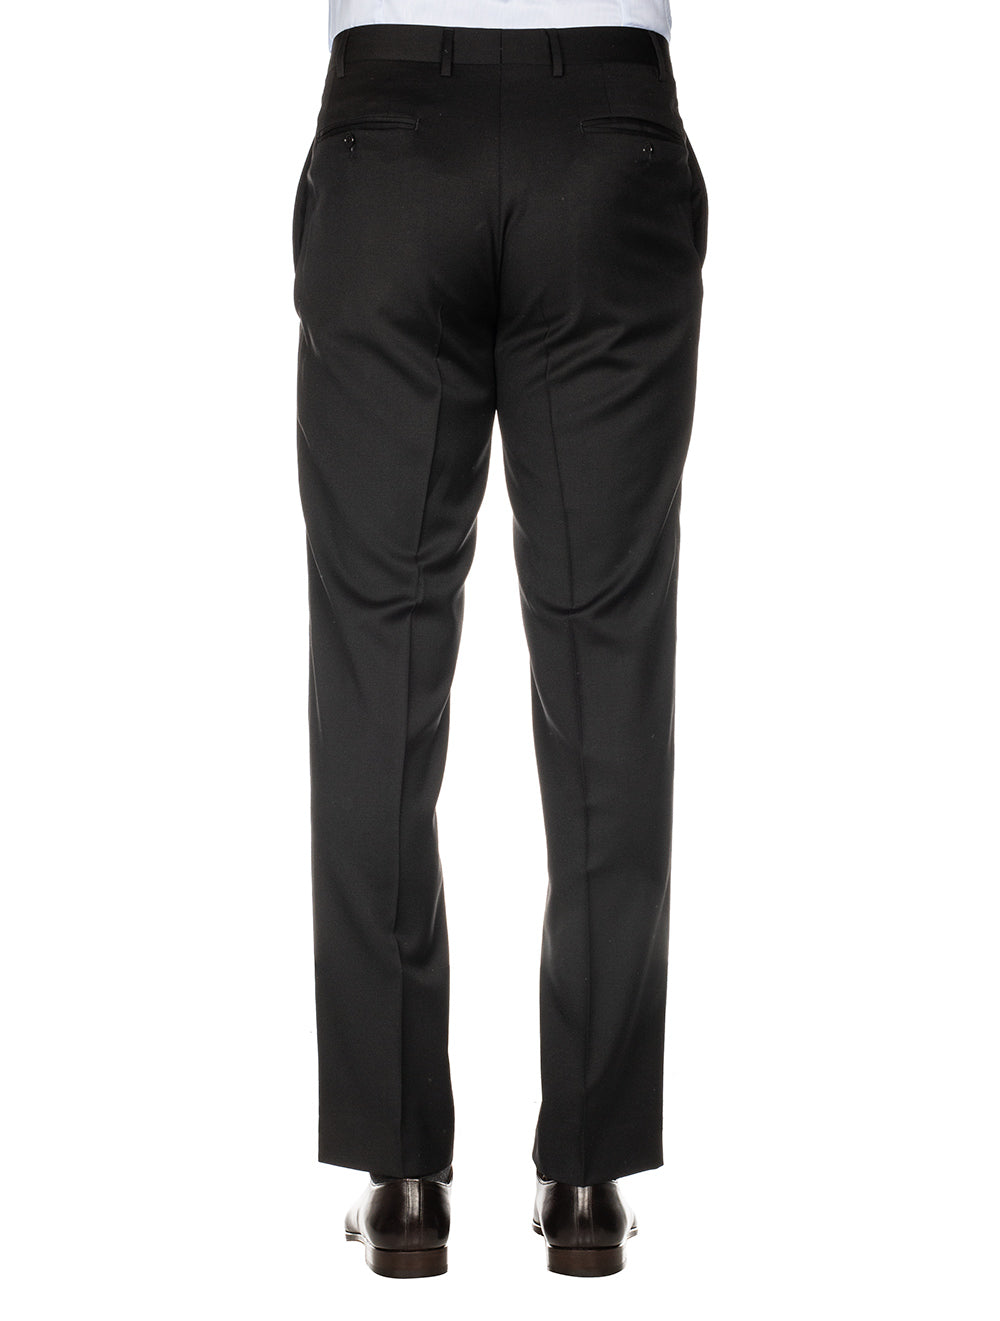 CANALI Wool Formal Trousers Black